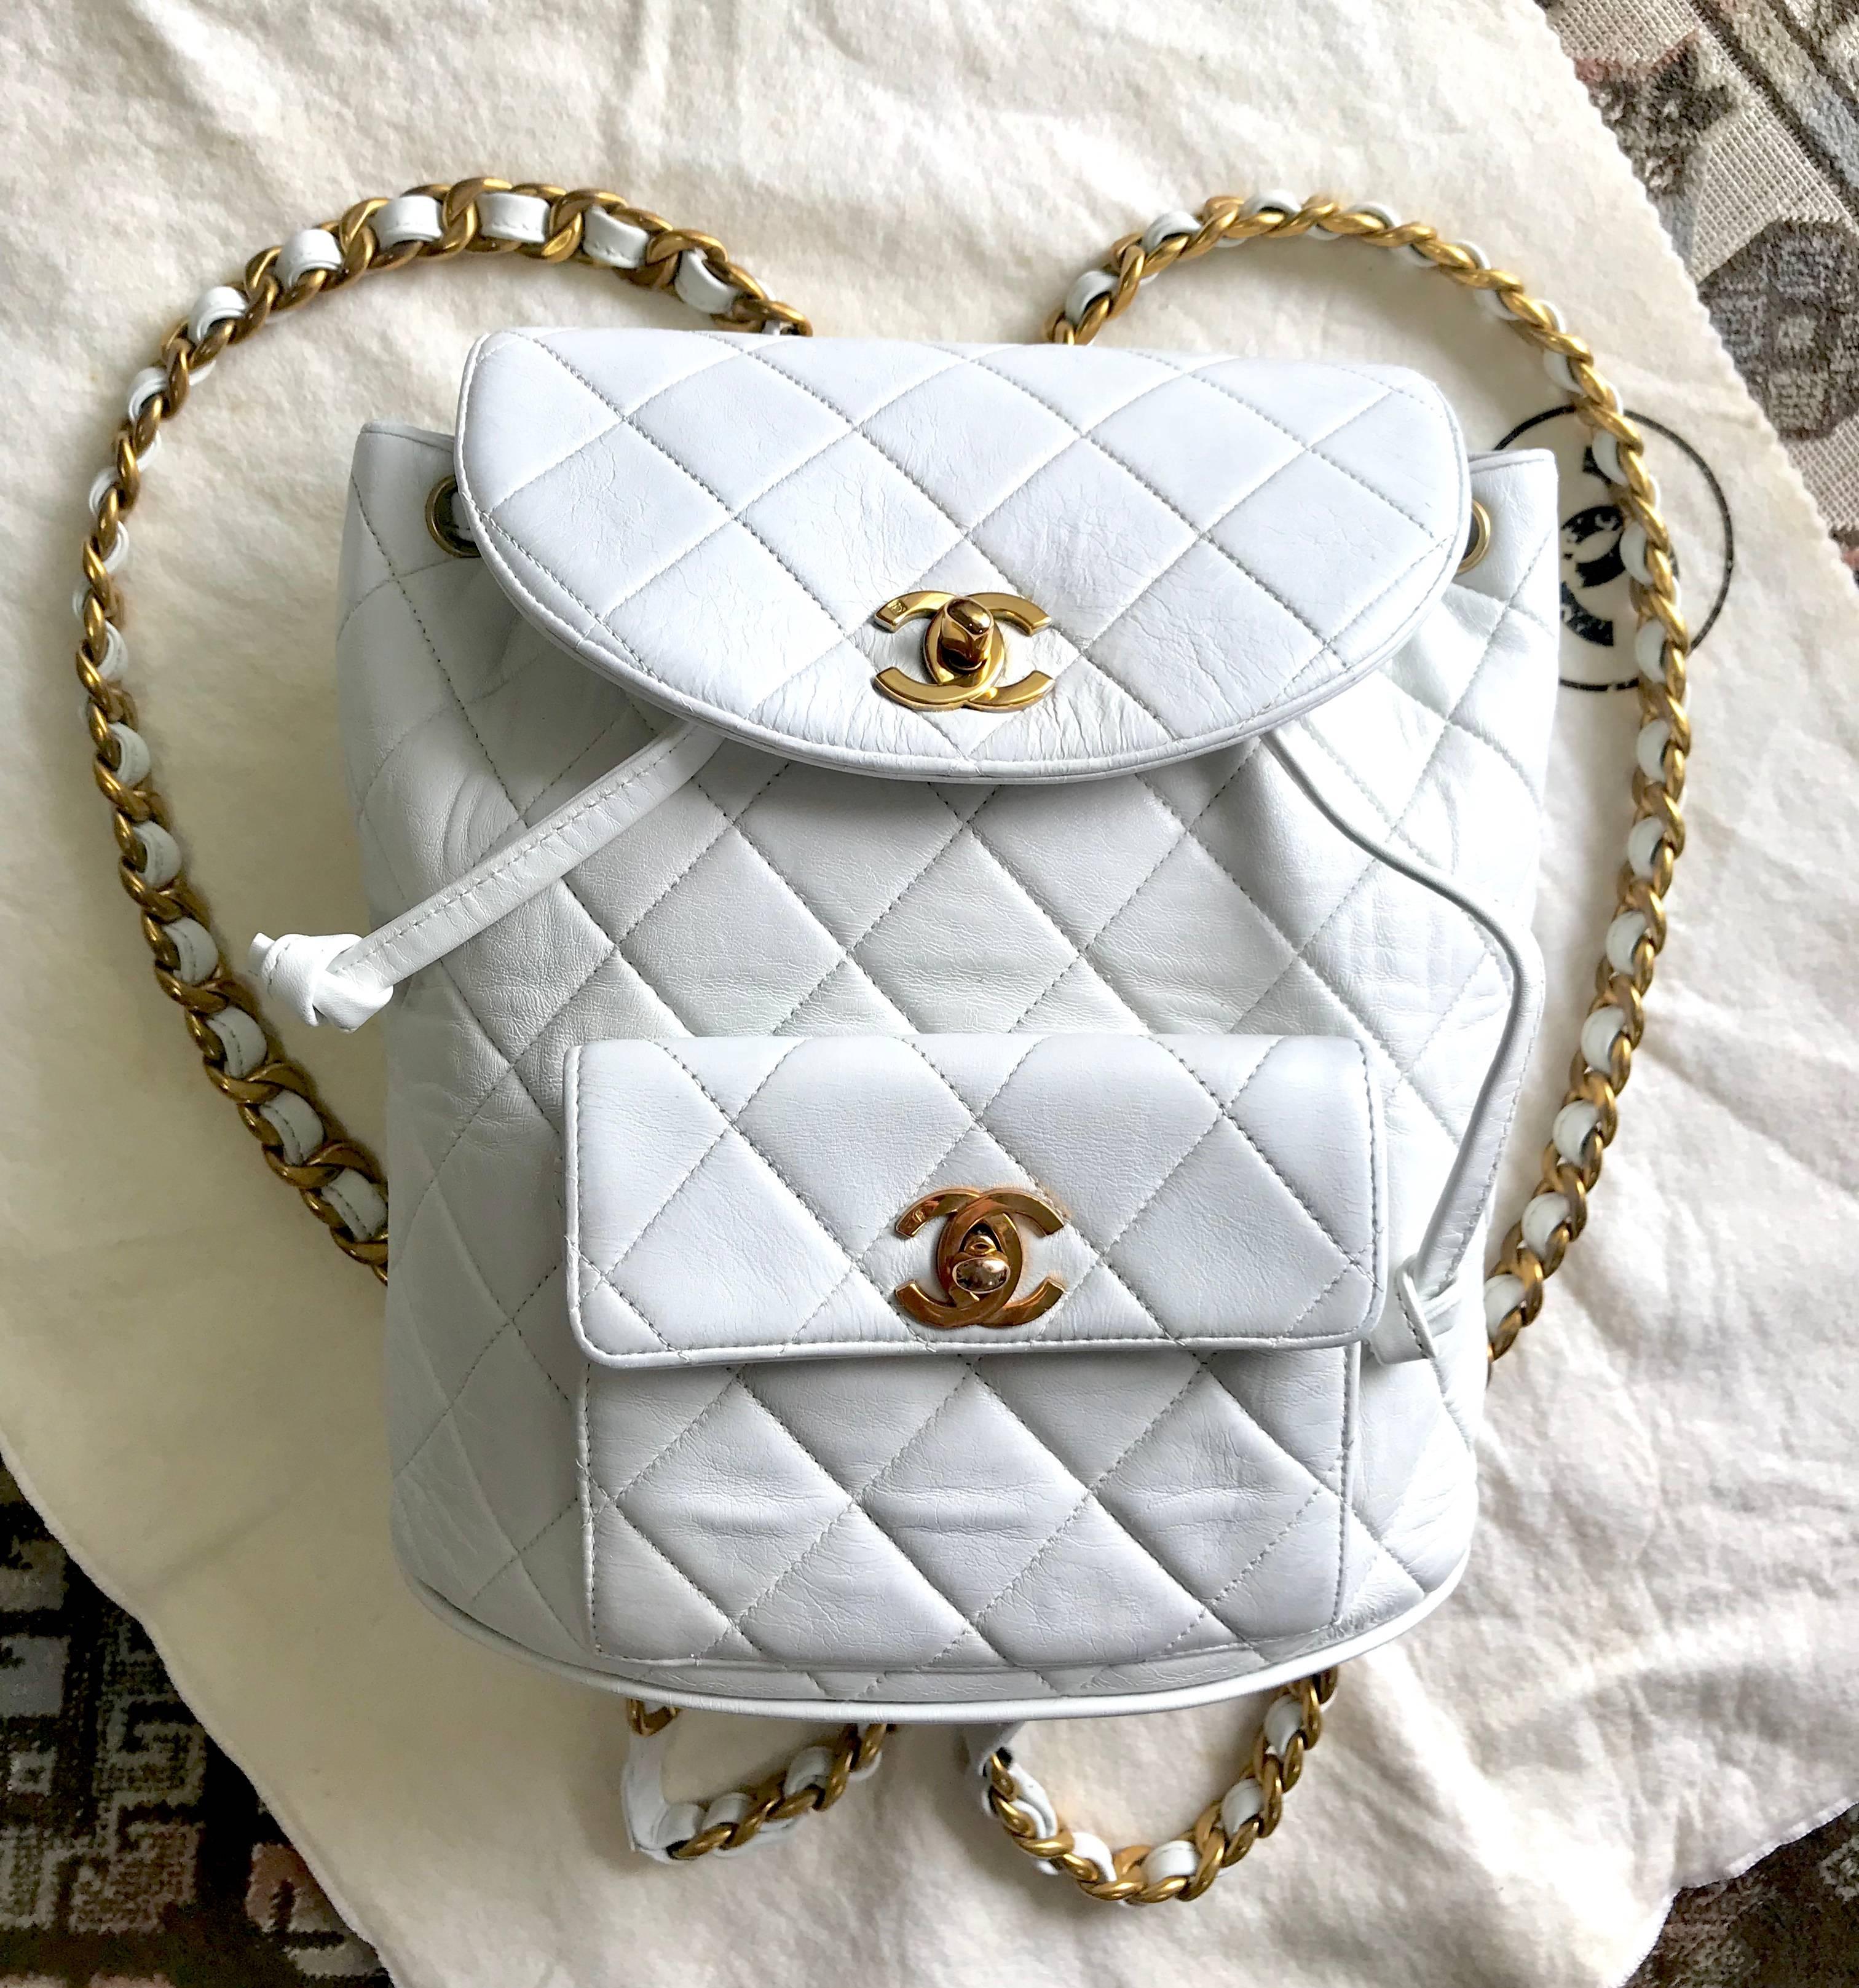 Vintage CHANEL white lamb leather backpack with golden chain and CC closure. 13